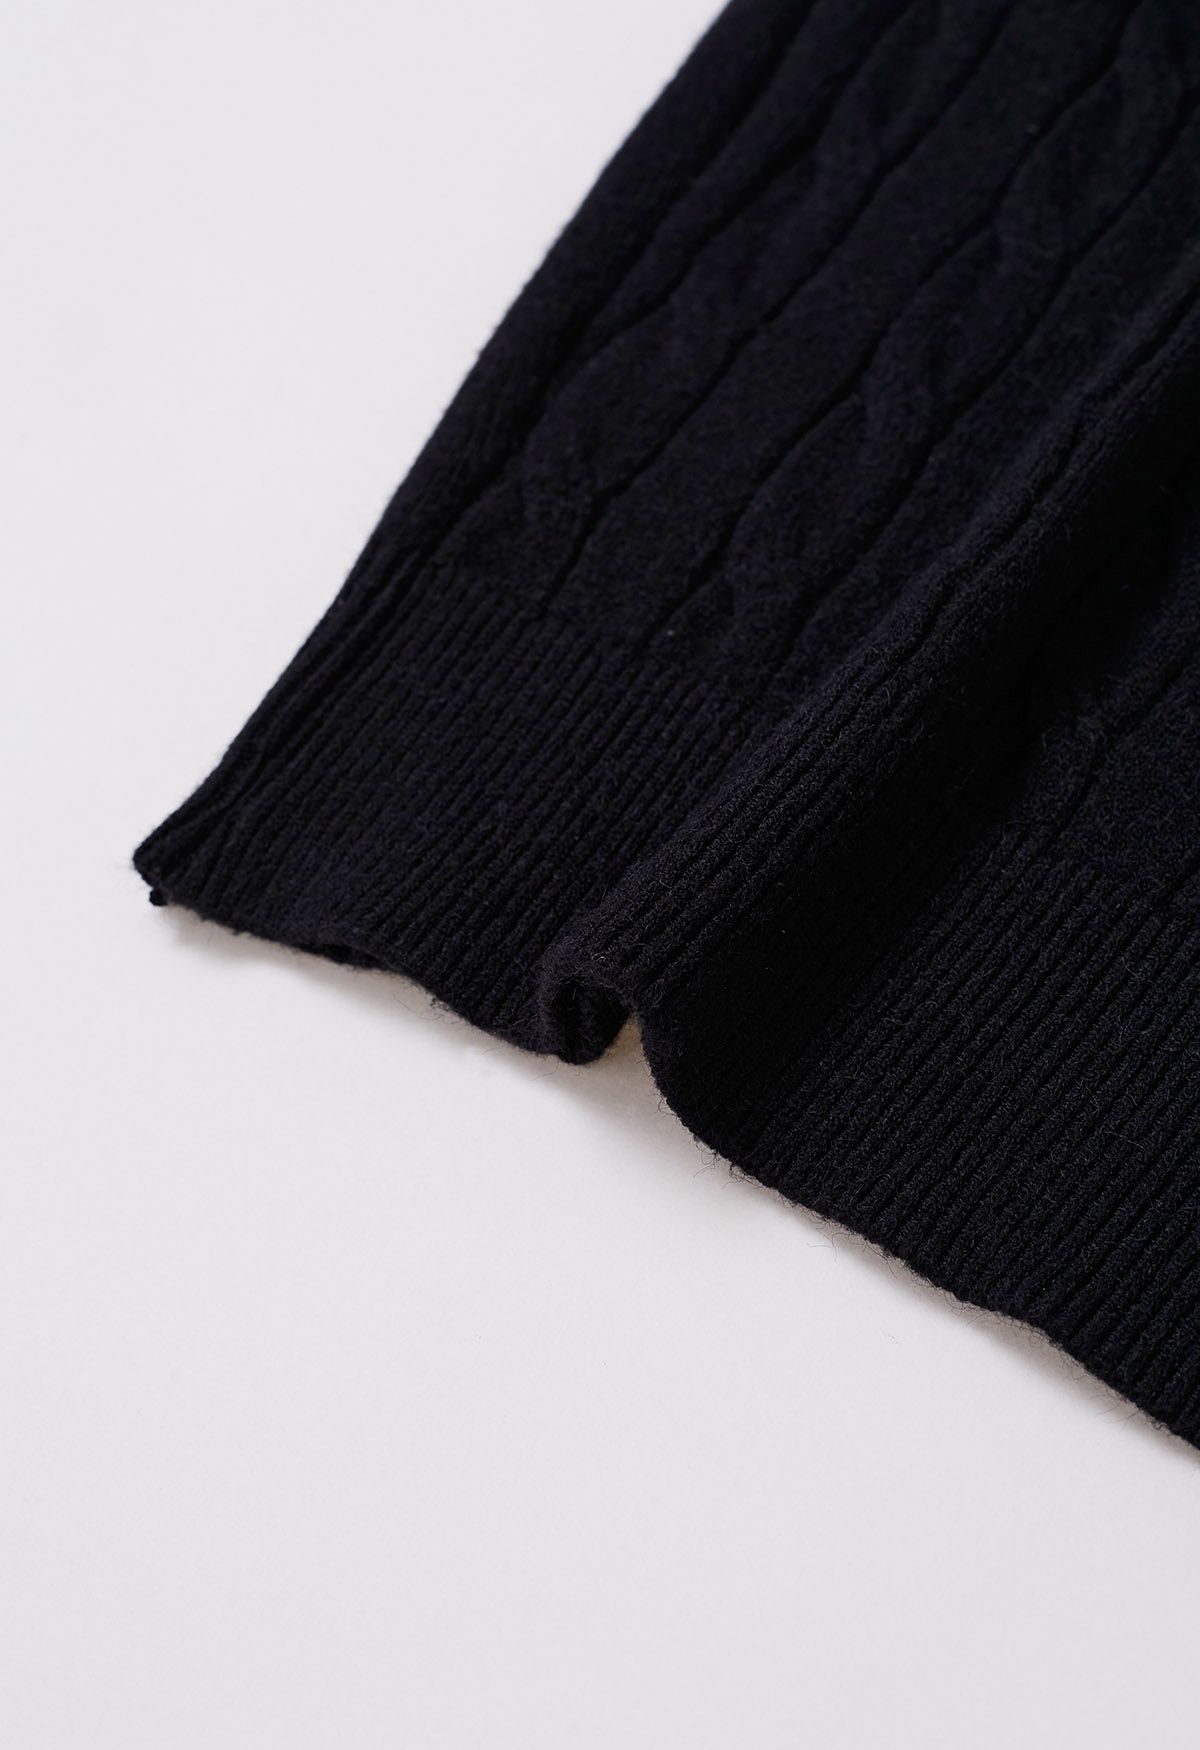 Soft Fuzzy Turtleneck Cable Knit Sweater in Black